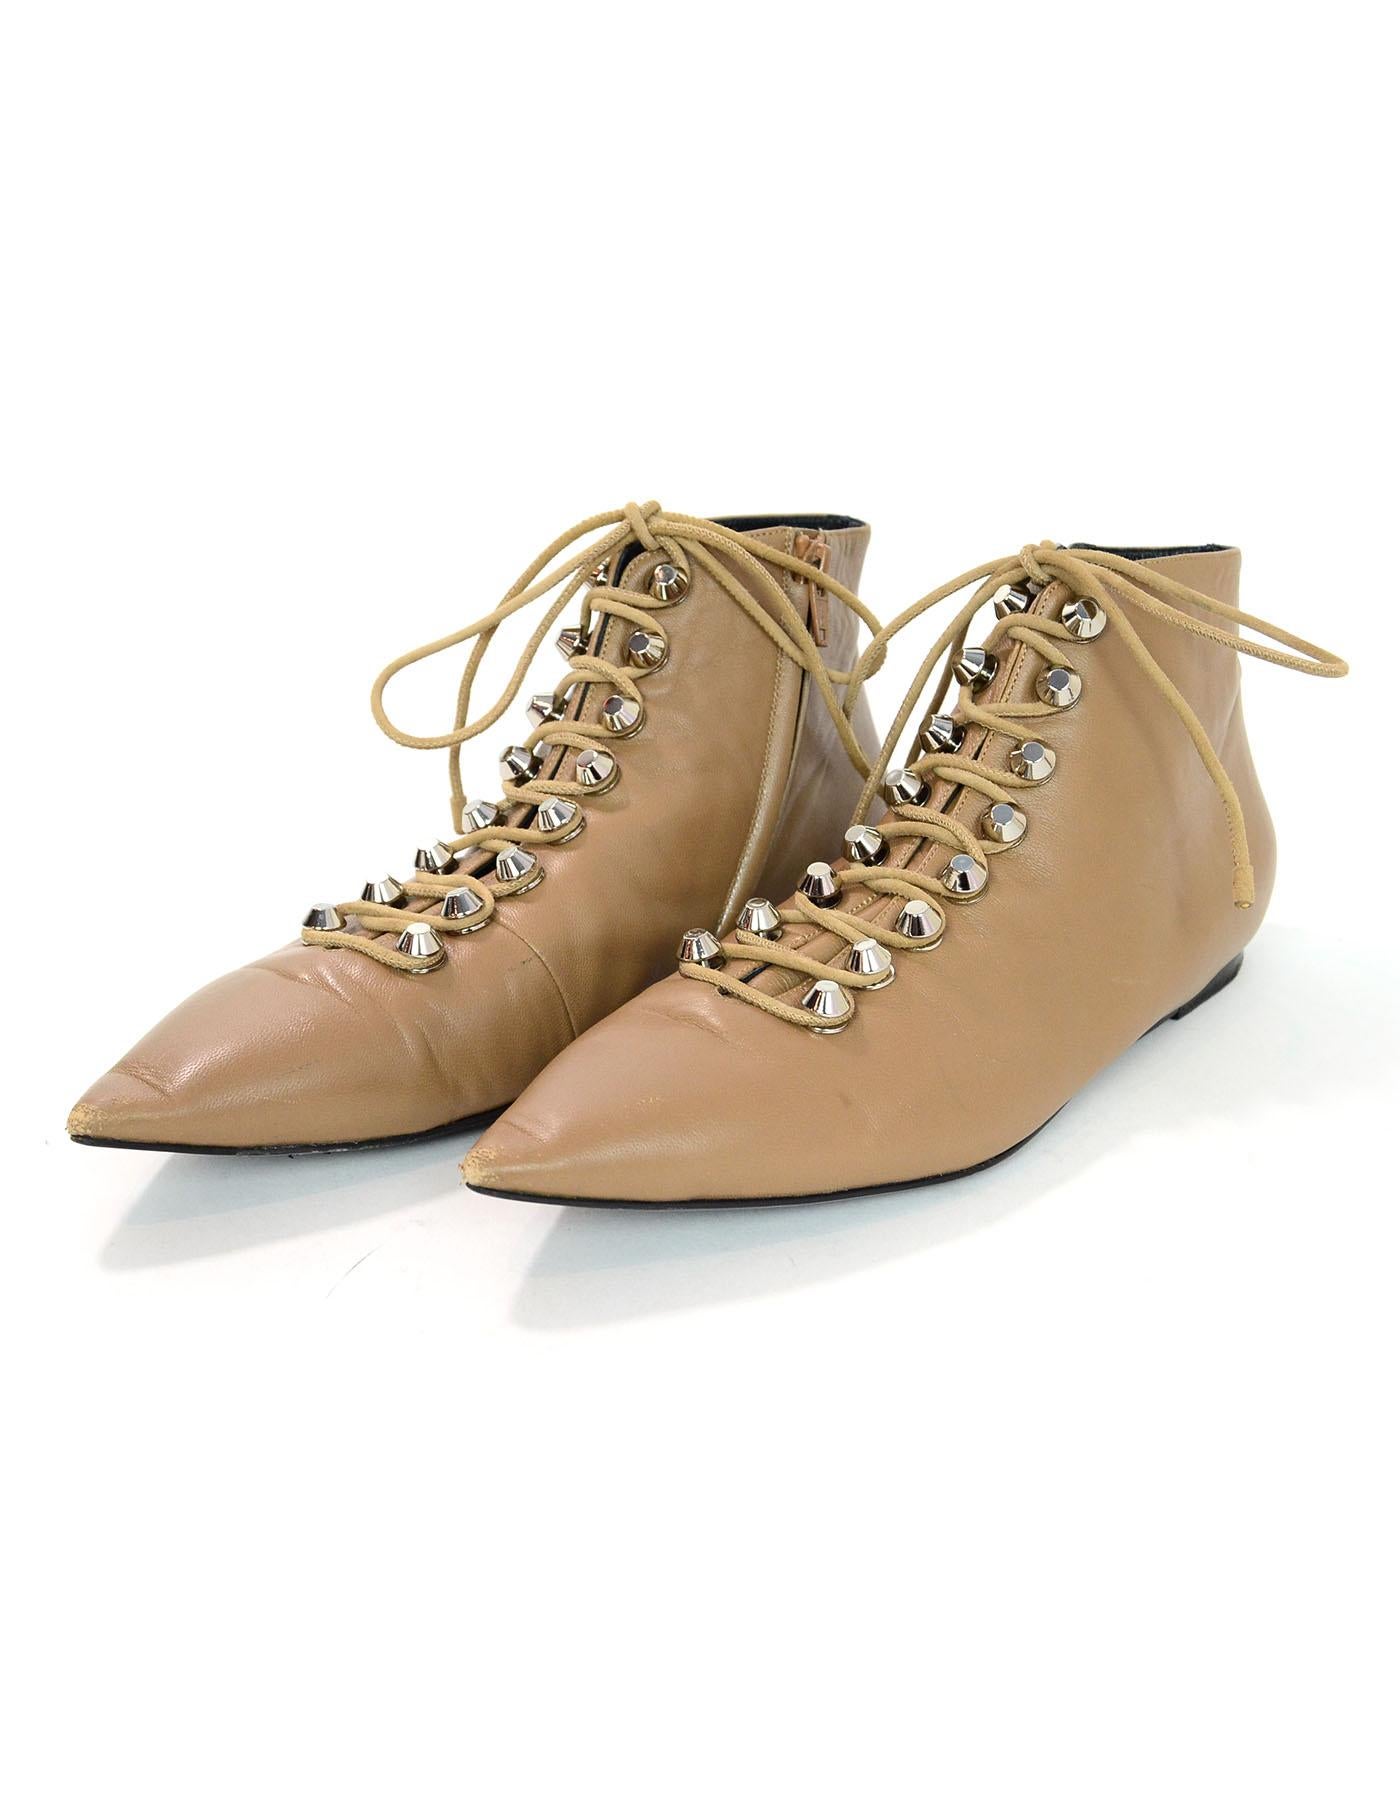 Balenciaga Tan Leather Pointed Toe Ankle Boots Sz 40

Made In: Italy
Color: Tan 
Materials: Leather
Closure/Opening: Lace tie closure
Sole Stamp: Balenciaga 40 Made in Italy
Overall Condition: Very good pre-owned condition with the exception of some